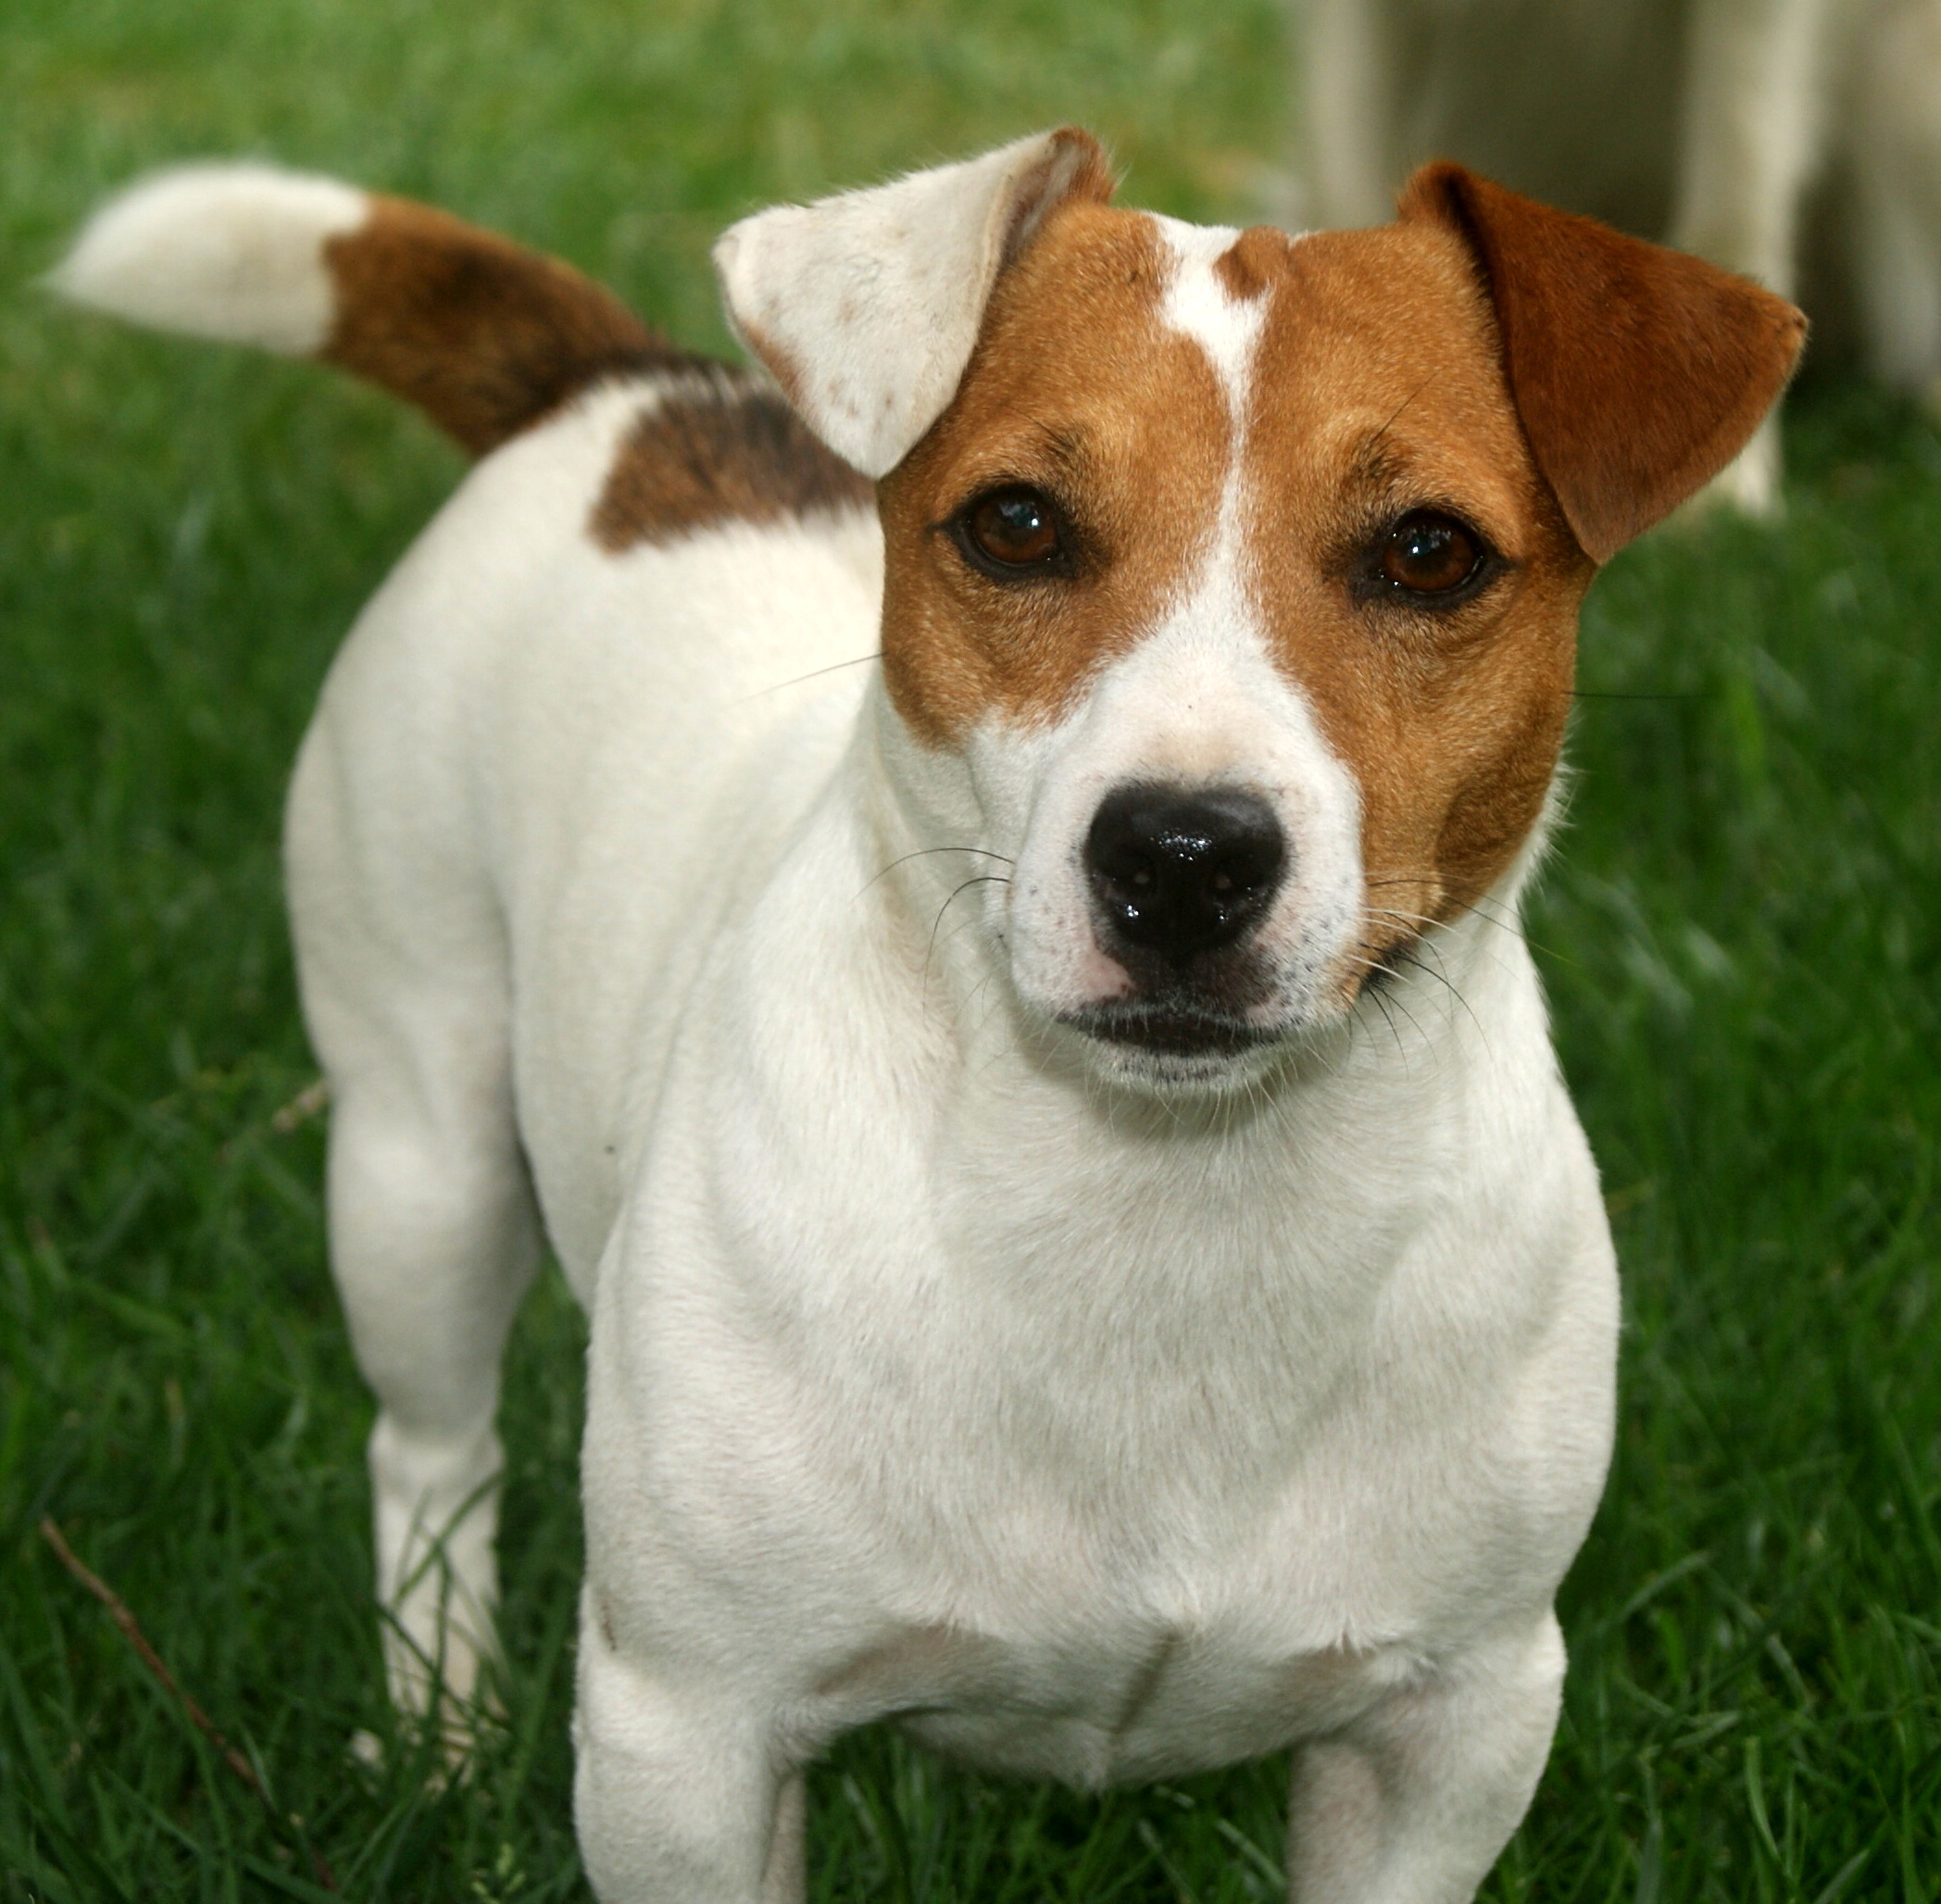 Russell Terrier Dog: Russell Lovely Jack Russell Terrier Dog Breed